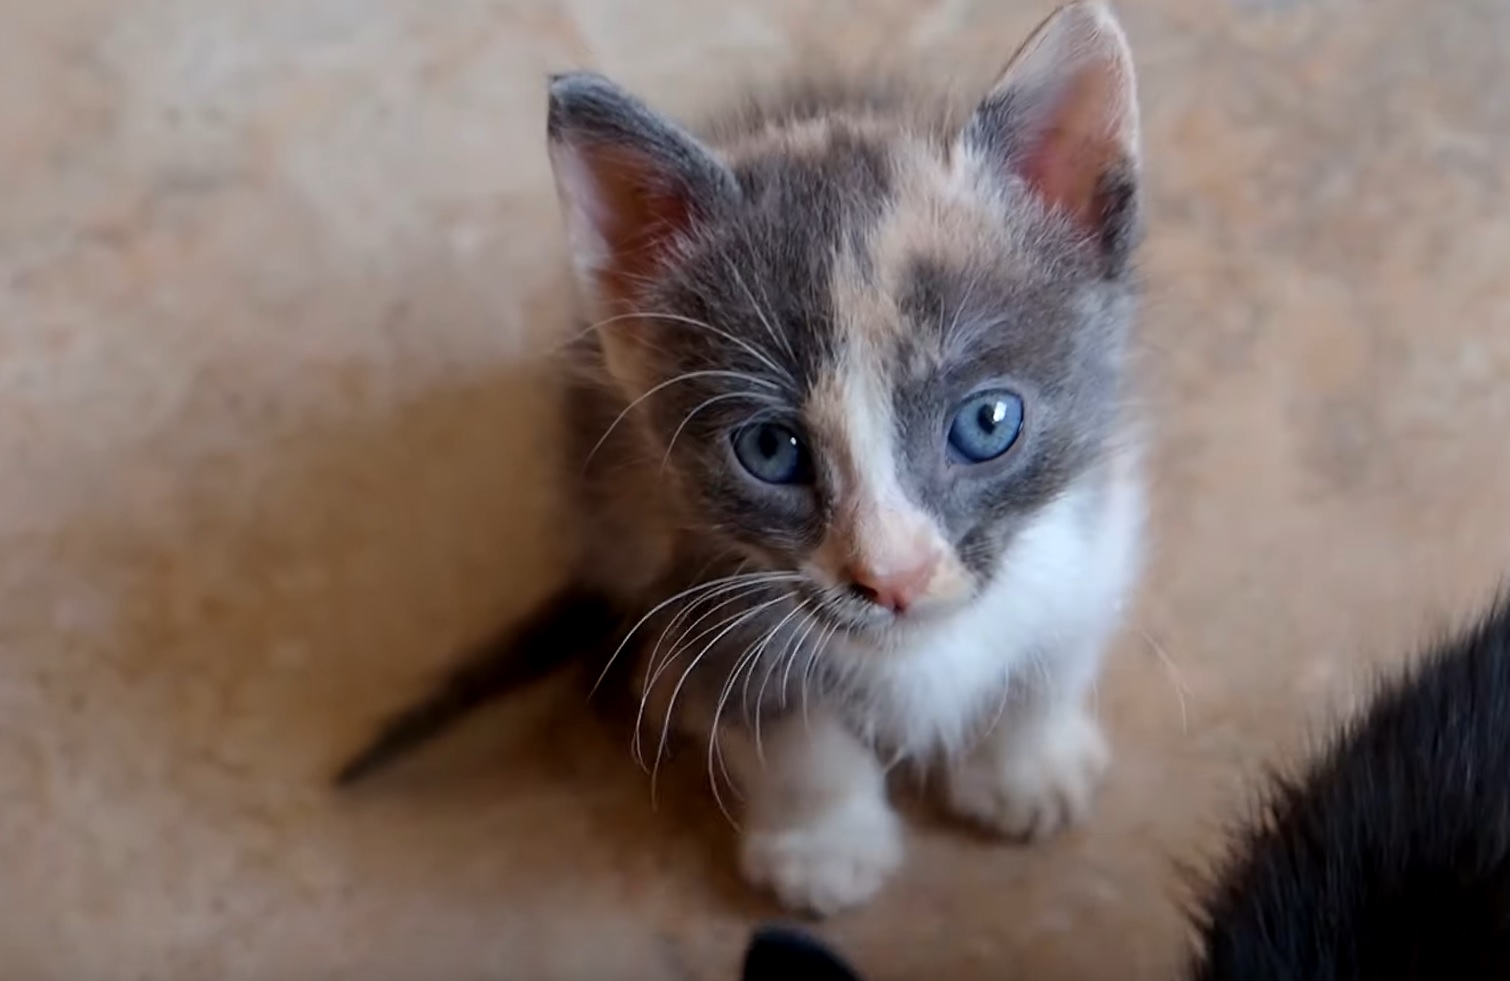 This Rescued Kitten Has Most Beautiful Eyes